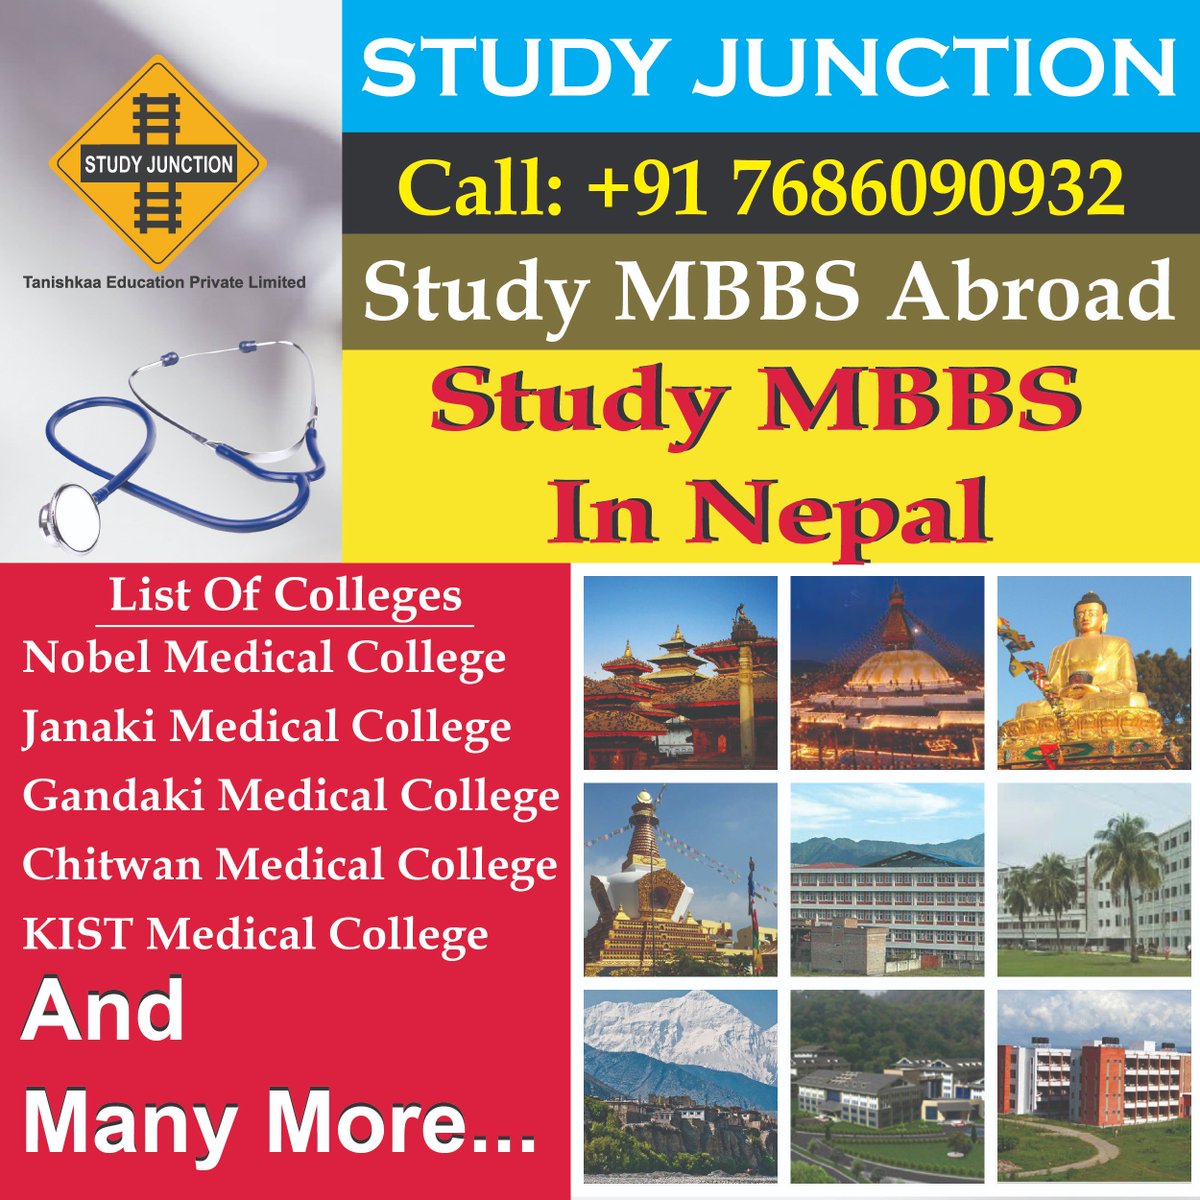 Admission open for studying MBBS in Nepal. Students not registered for NEET-UG 2018 are also eligible. Hurry Now book your seats!  #studyjunction #kolkata #mbbsabroad #mbbsinnepal #nepal #nepalmbbs #nepalmbbs2018 #neet2018